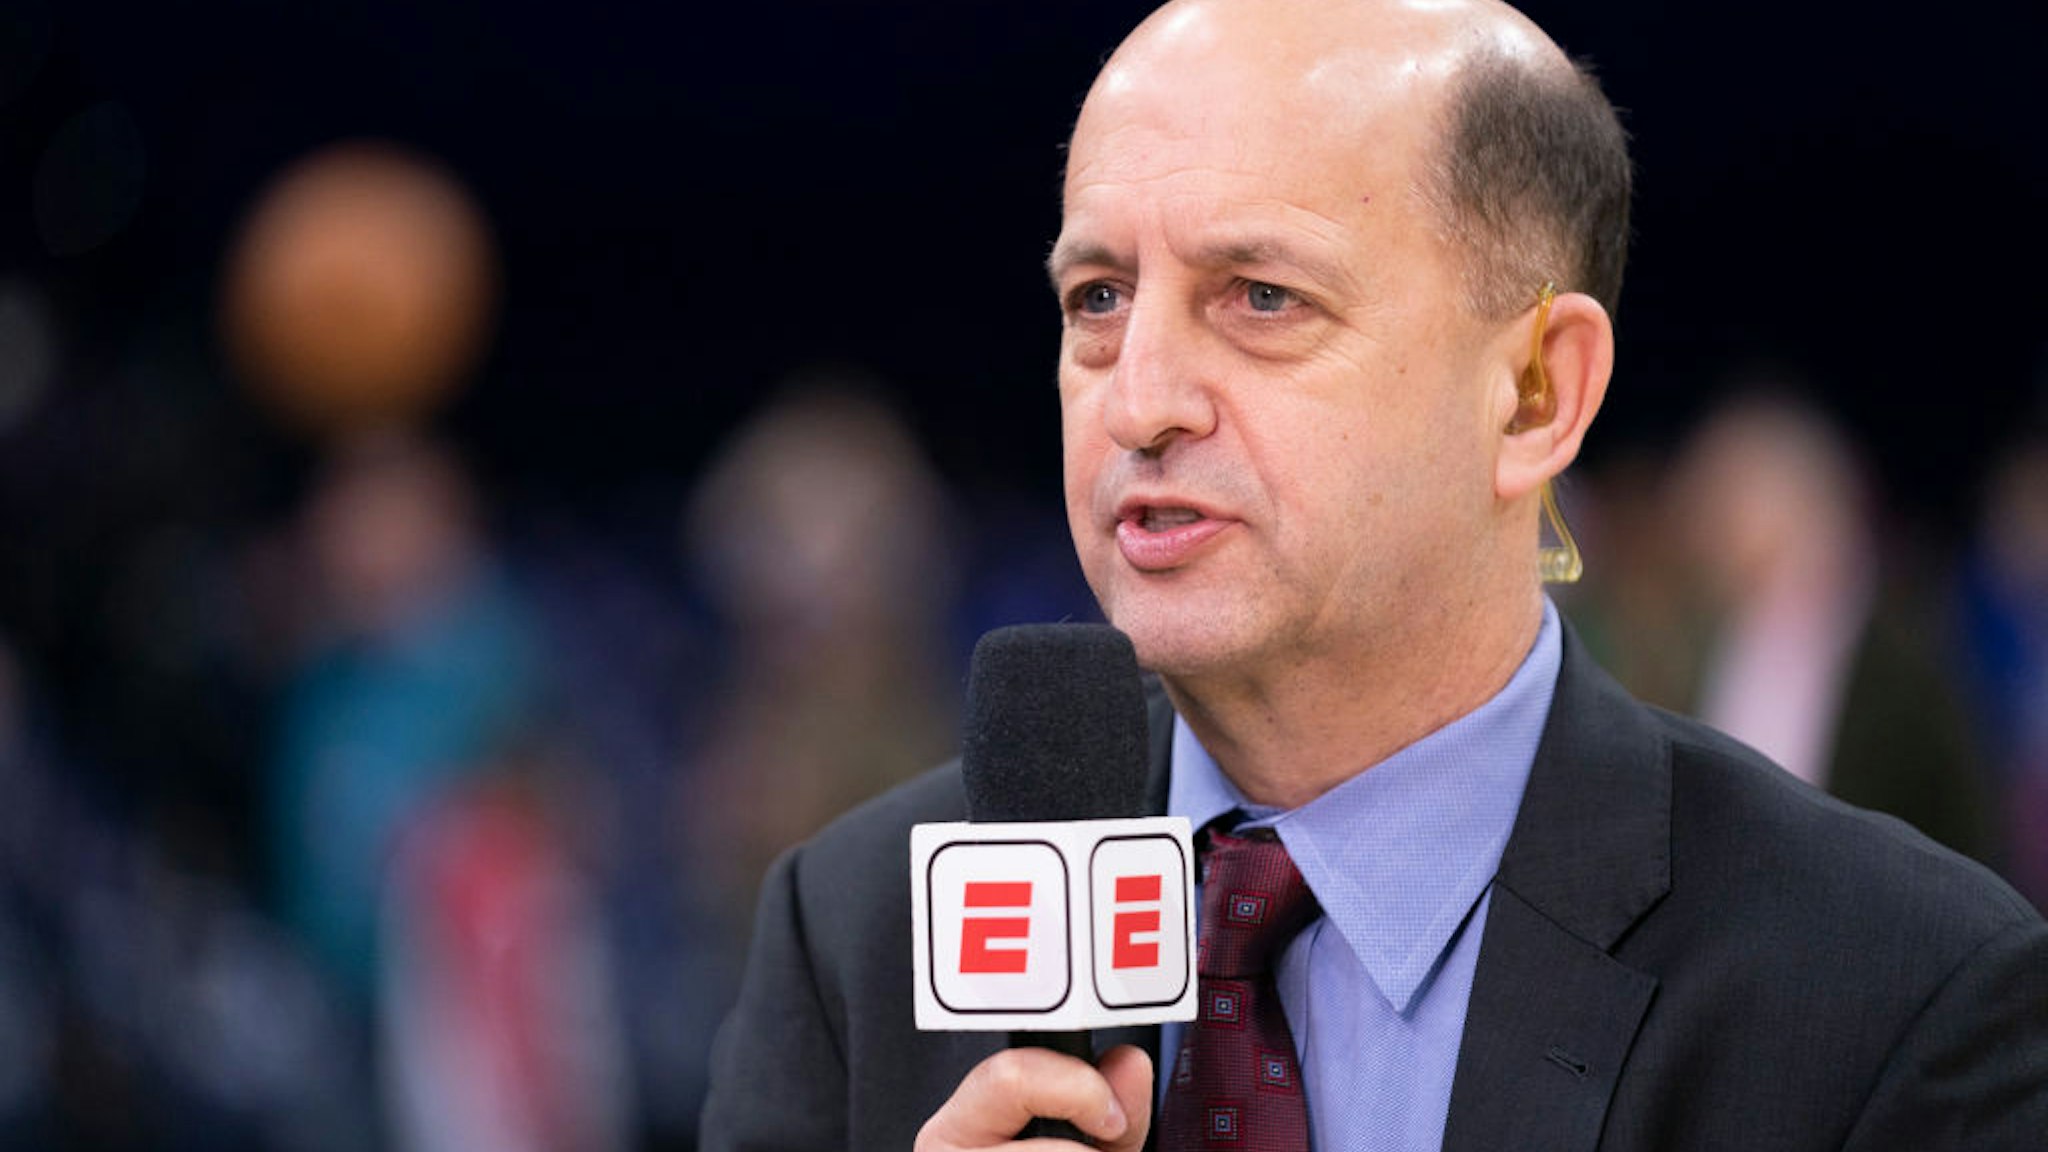 PHILADELPHIA, PA - DECEMBER 18: ESPN analyst Jeff Van Gundy talks prior to the game between the Miami Heat and Philadelphia 76ers at the Wells Fargo Center on December 18, 2019 in Philadelphia, Pennsylvania. NOTE TO USER: User expressly acknowledges and agrees that, by downloading and/or using this photograph, user is consenting to the terms and conditions of the Getty Images License Agreement. (Photo by Mitchell Leff/Getty Images)